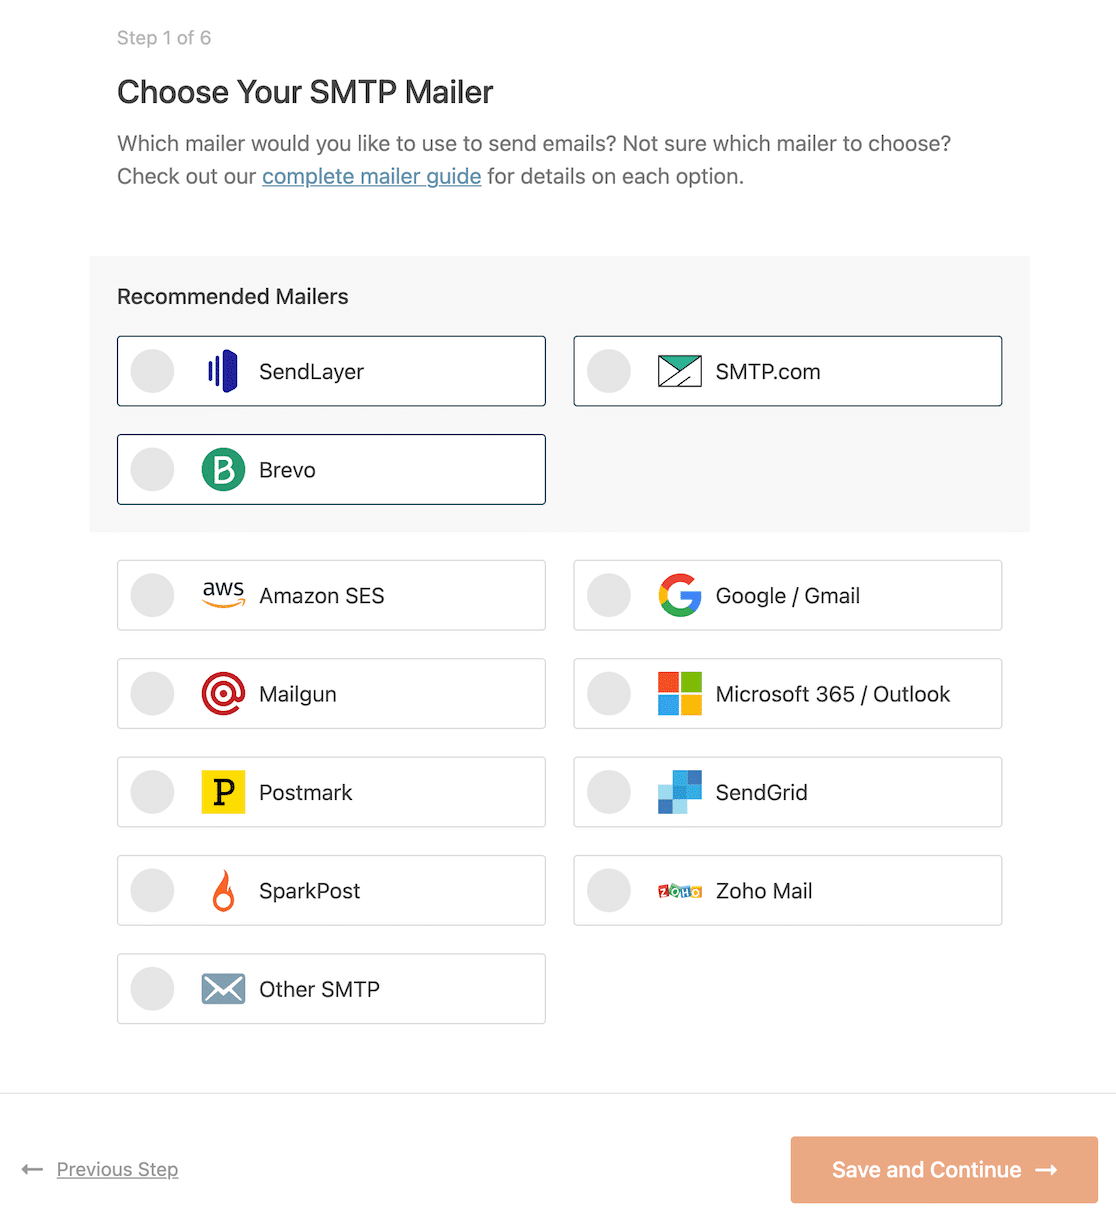 Select your SMTP mailer